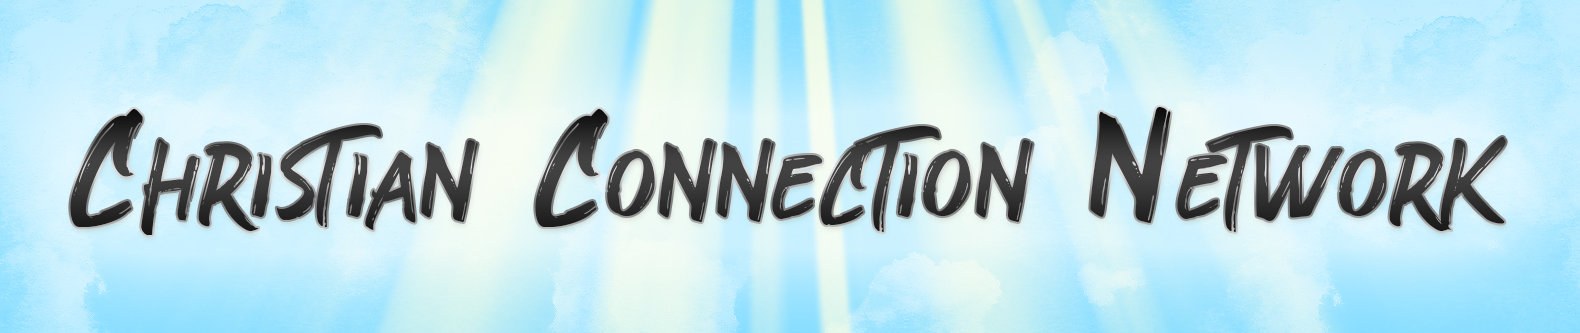 Christian Connection Network